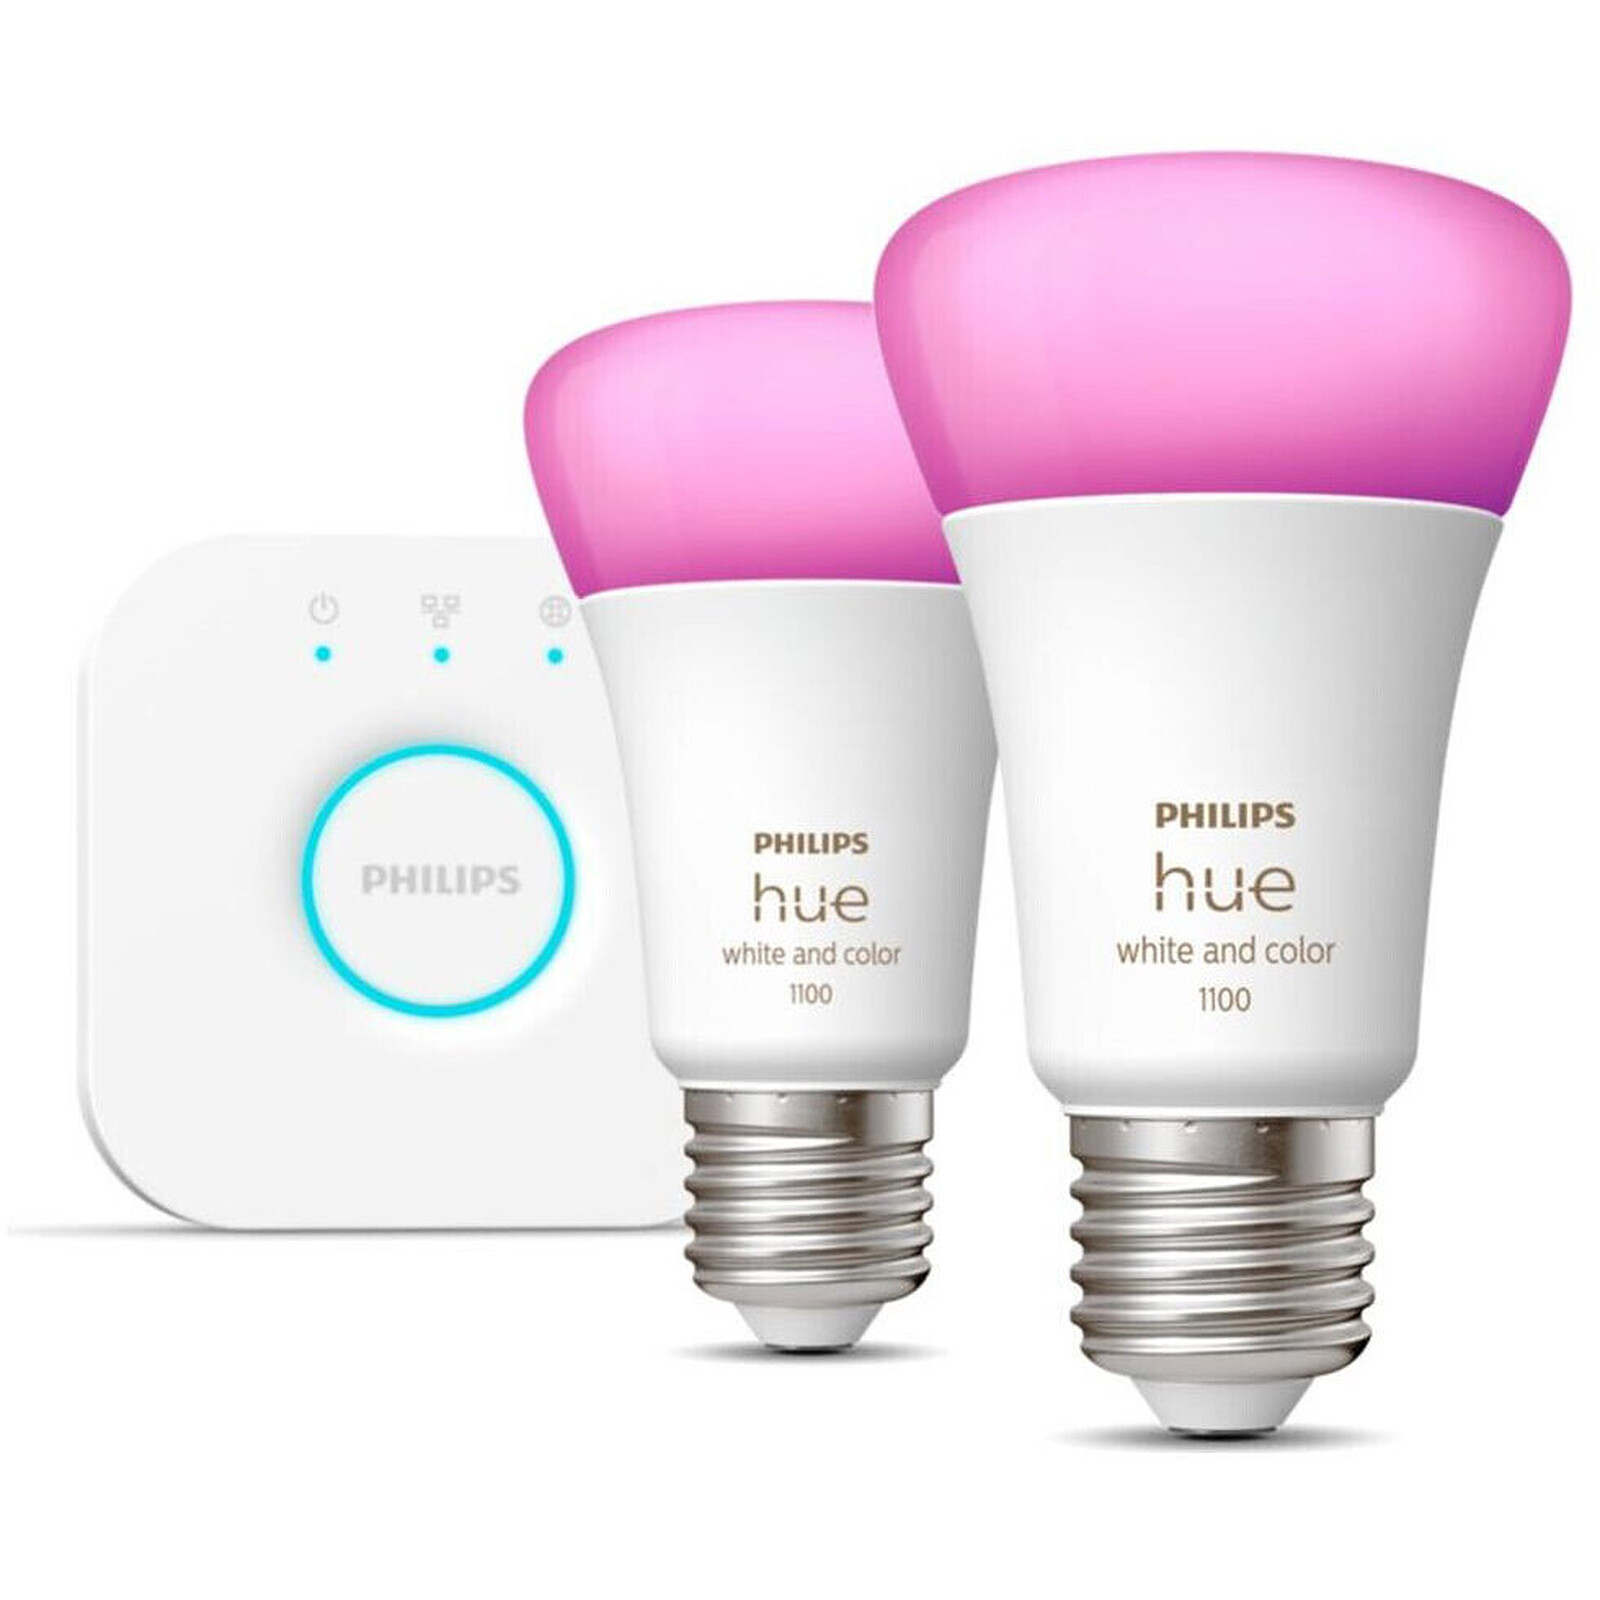 Philips Hue White and Color Ambiance Starter Kit E27 A60 11 W Bluetooth x 2